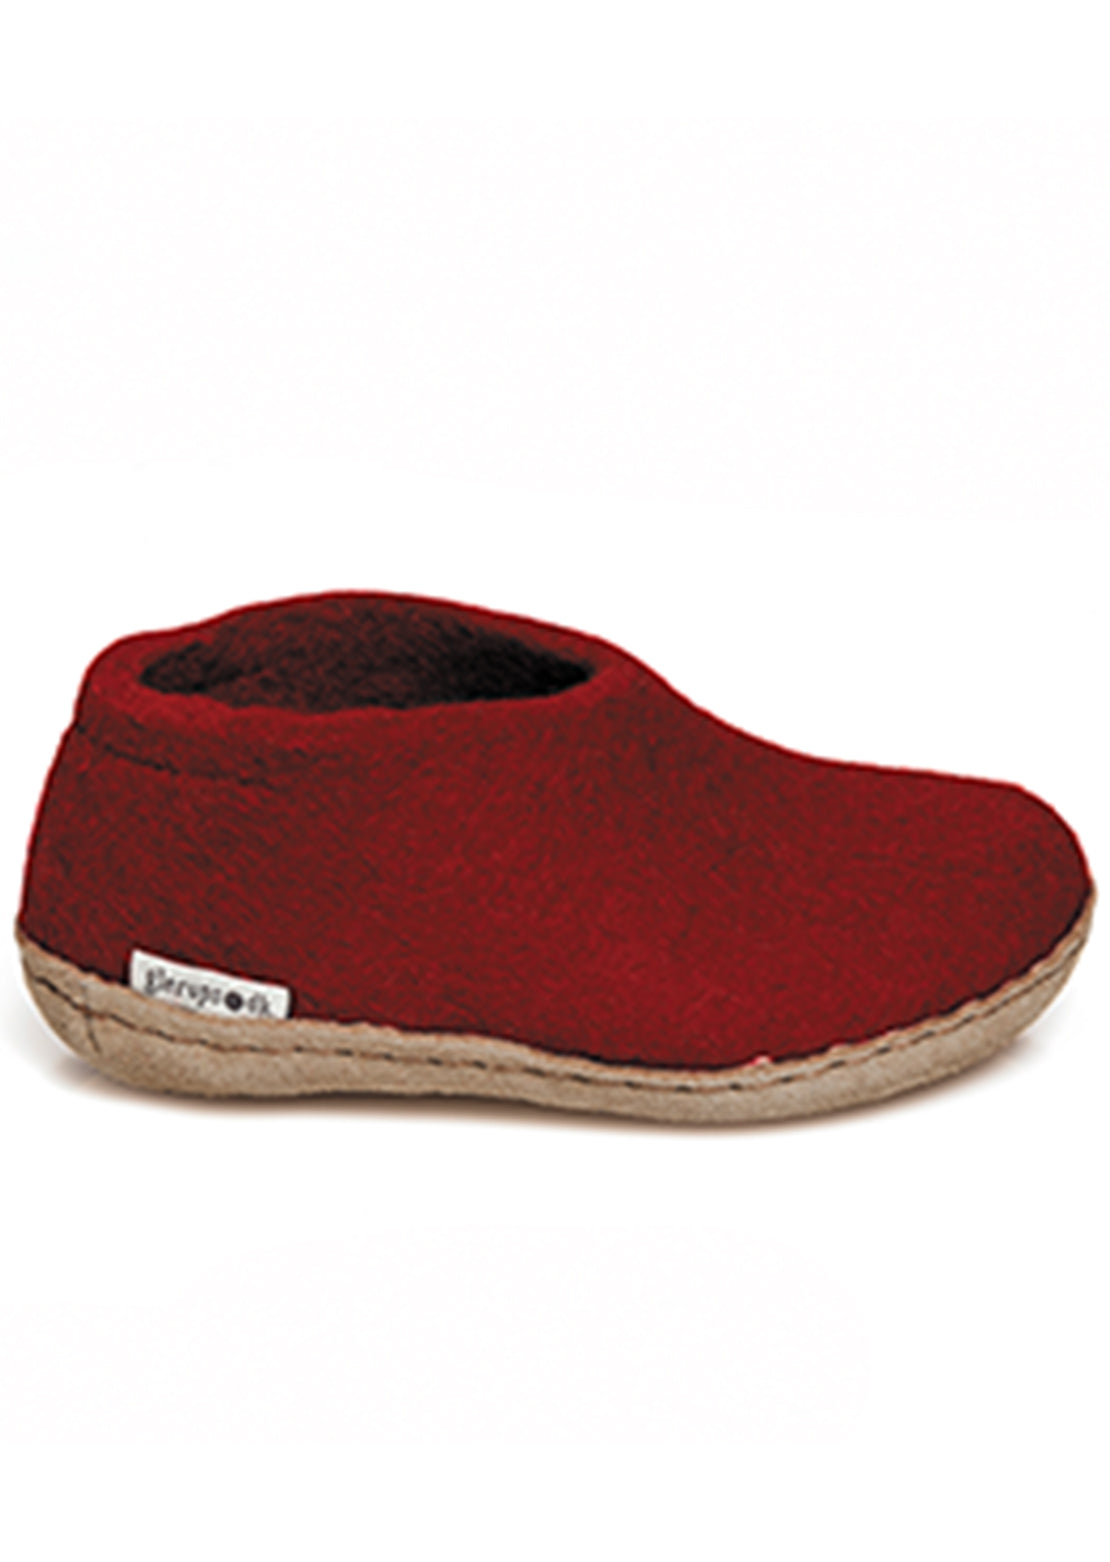 Glerups Junior Leather Sole Shoes Red